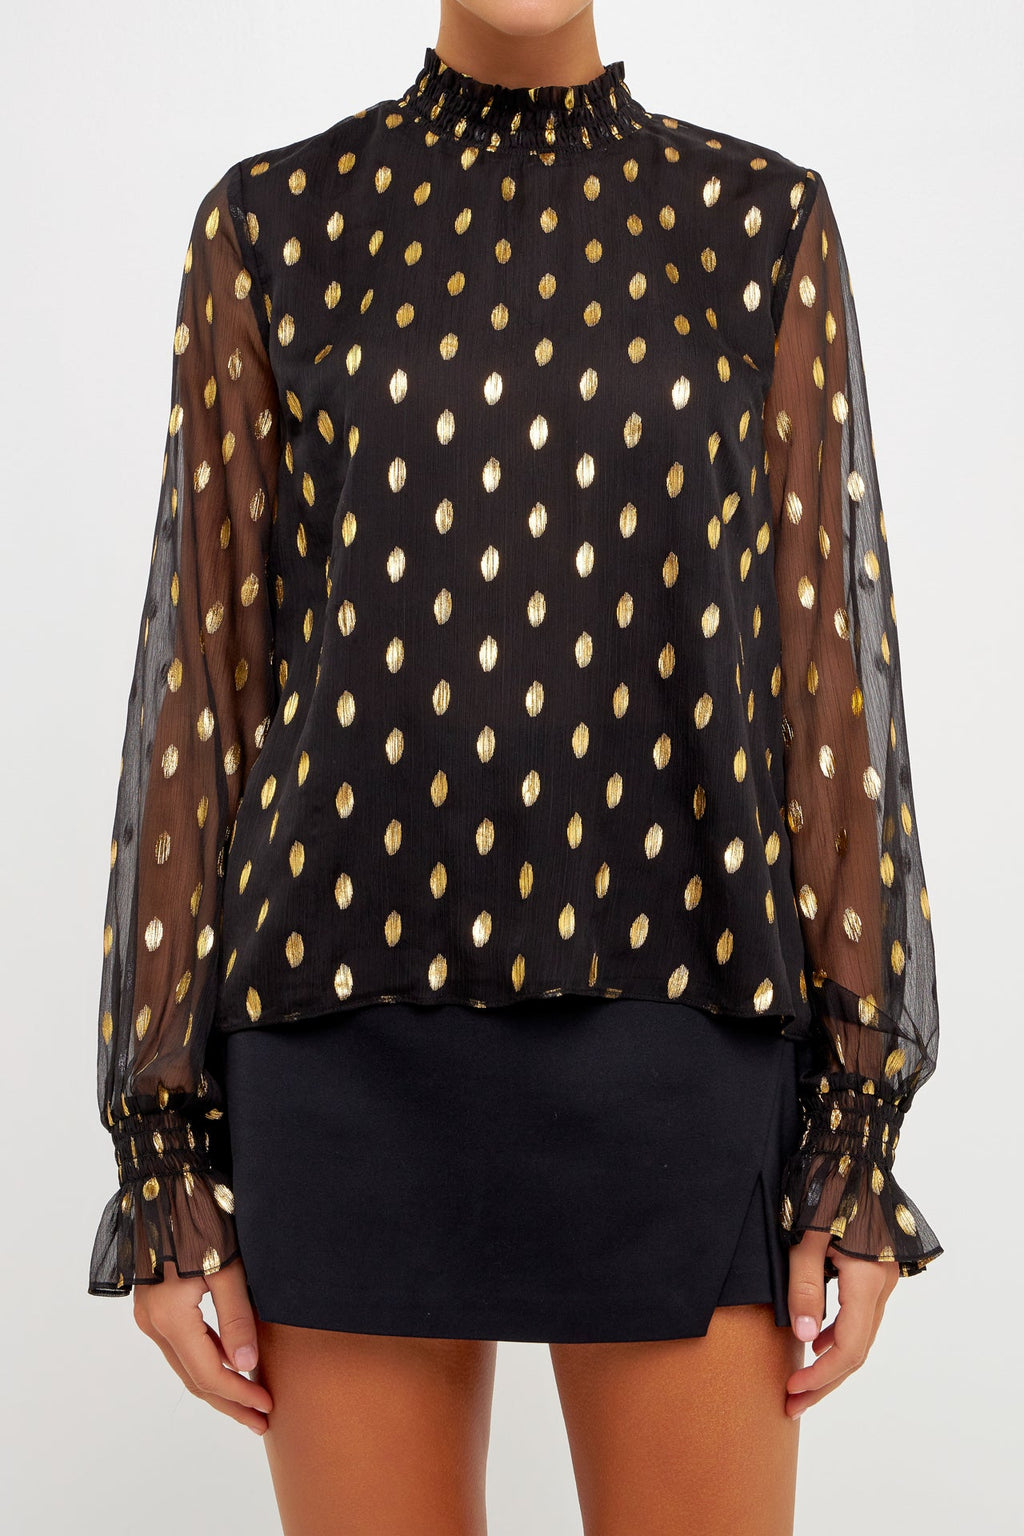 Endless Smiles Front Tie Polka Dot Top- Navy – The Pulse Boutique